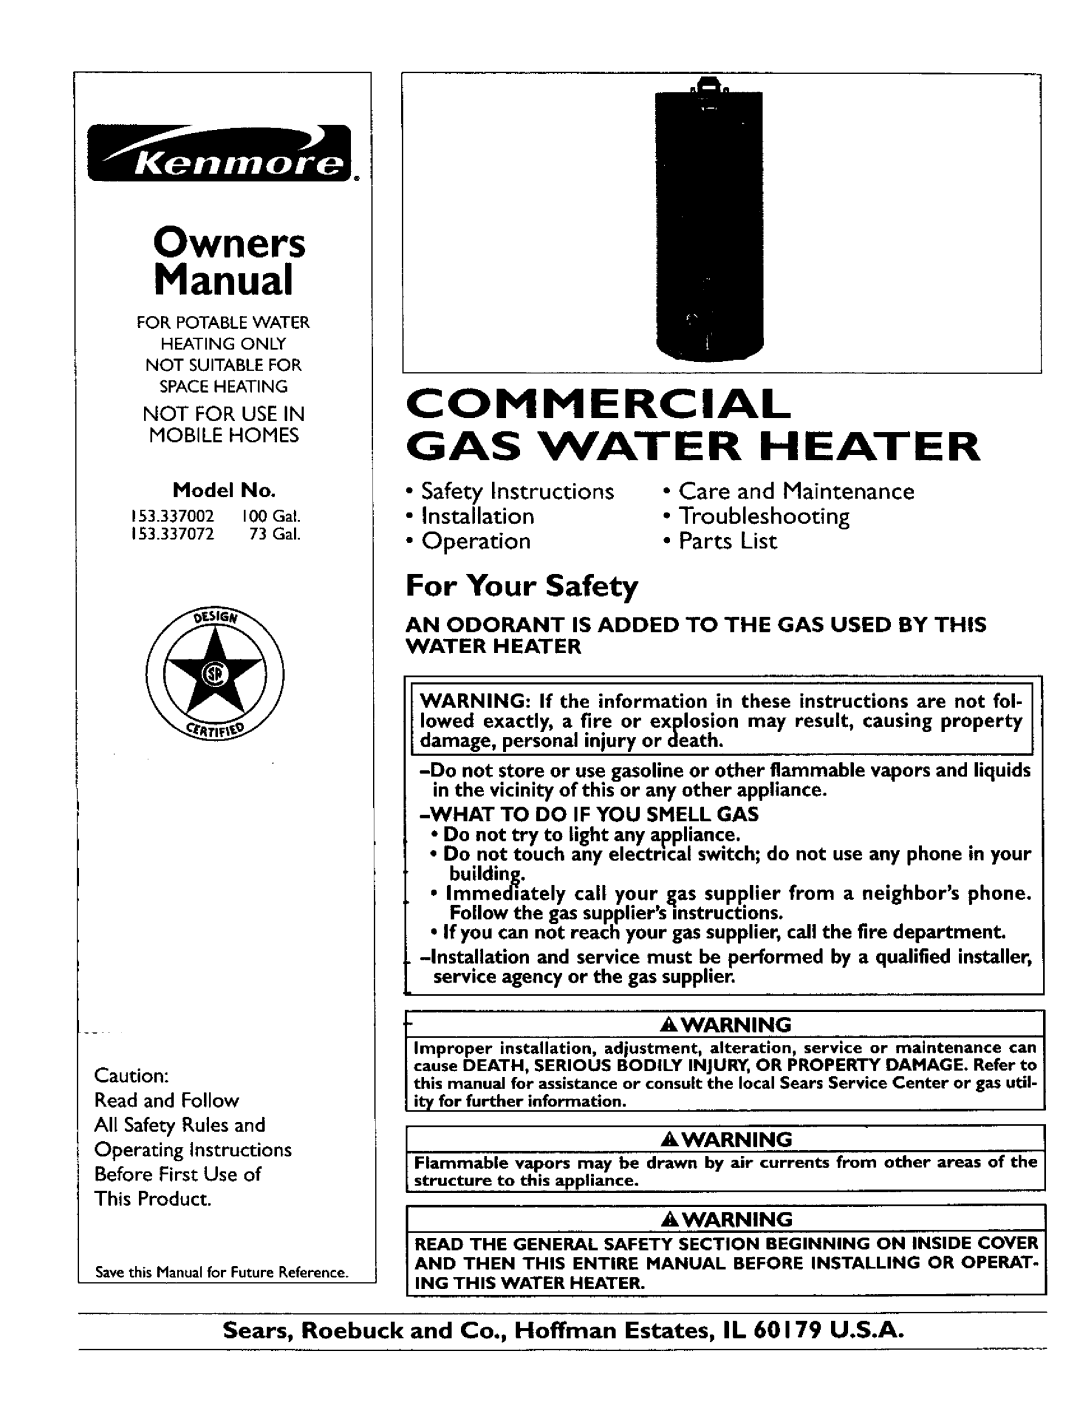 Kenmore 153.337002 owner manual For Your Safety, Read and Follow All Safety Rules and, This Product, Water Heater, Owners 